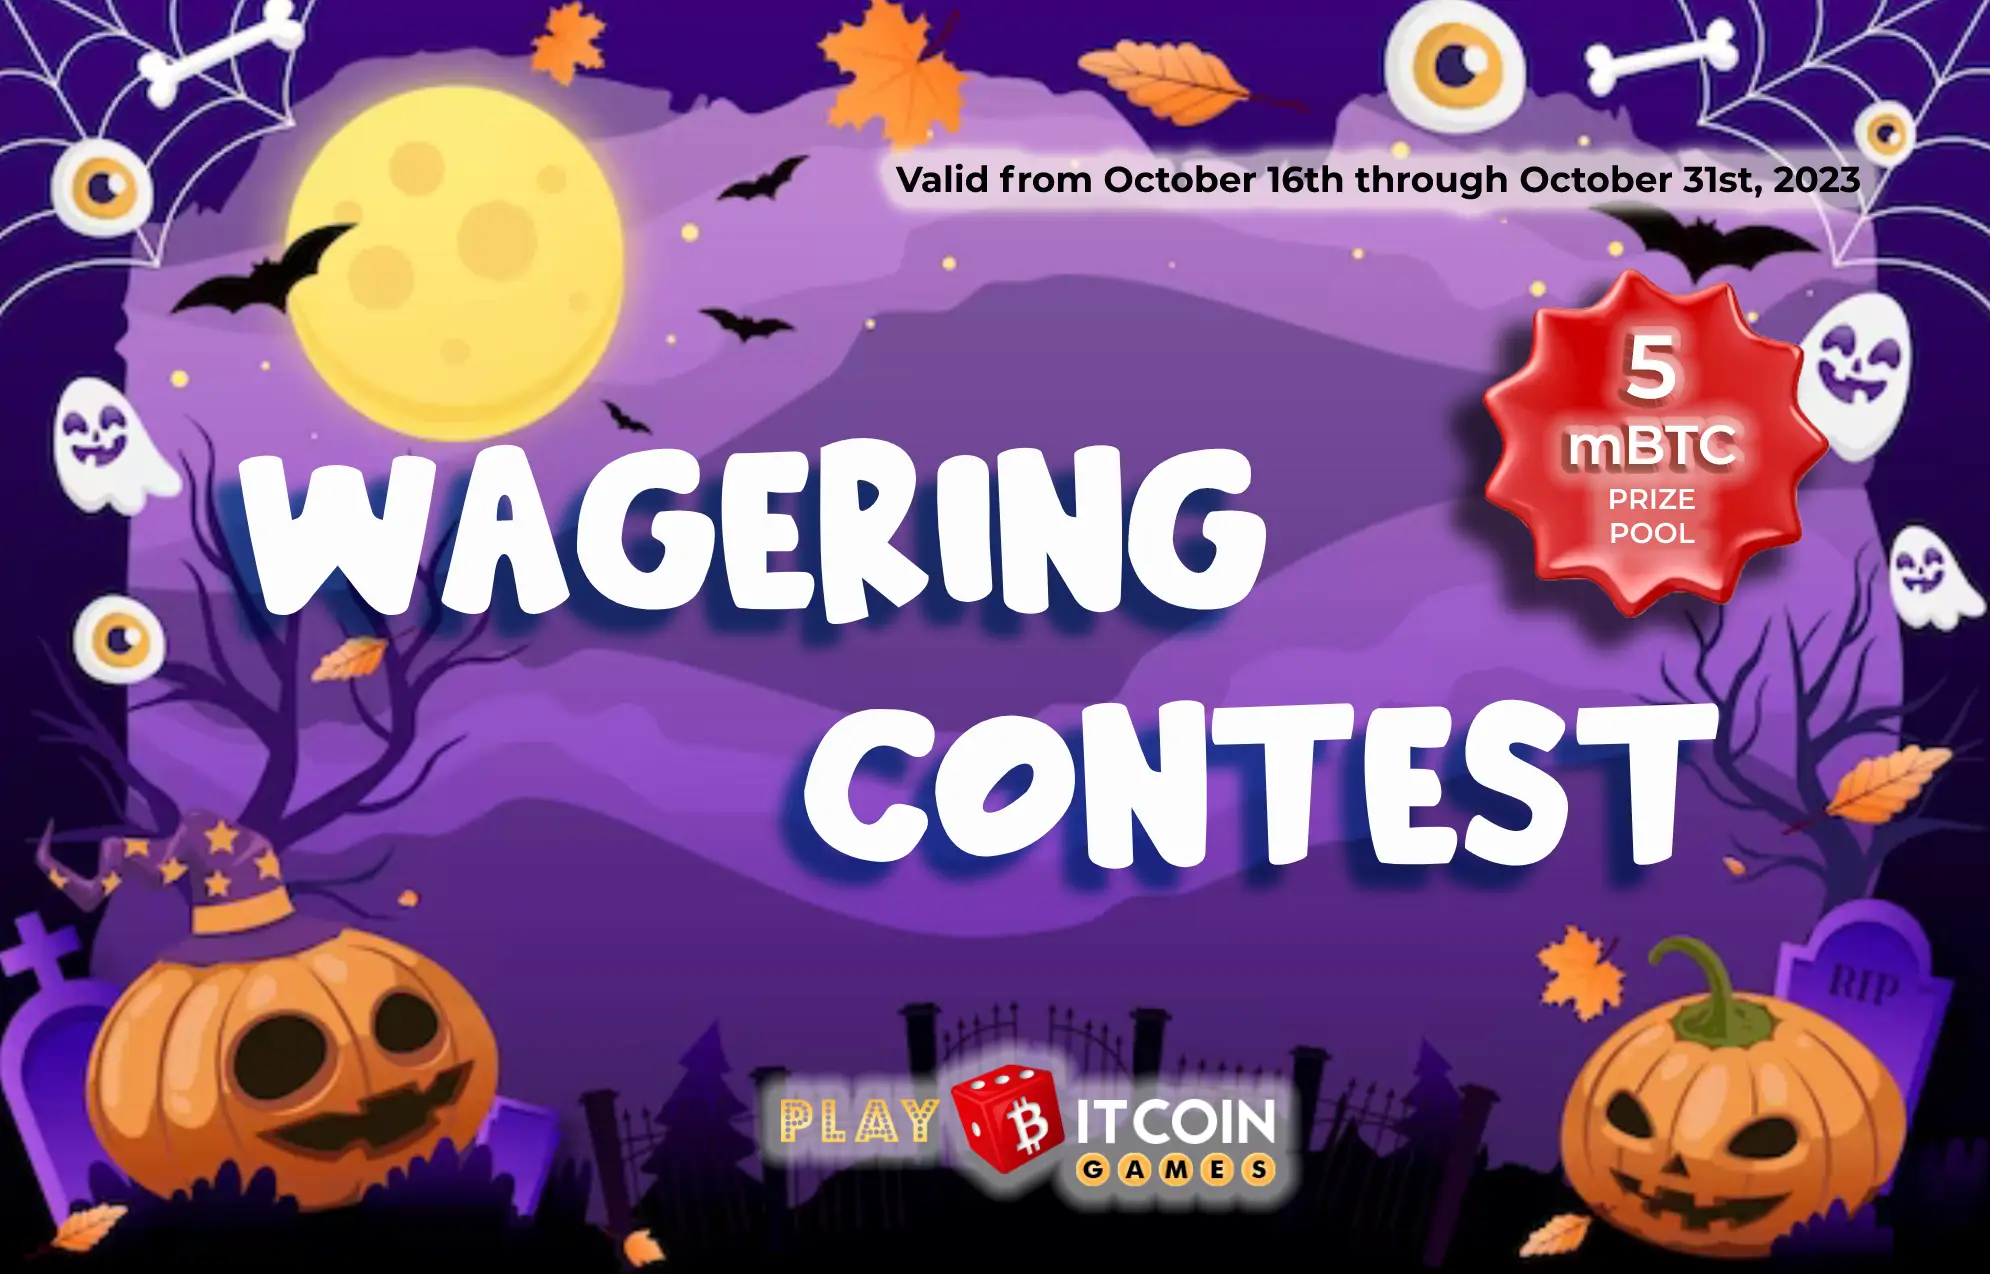 No Tricks, Just Treats: PBG’s 75th Wagering Contest is the Ultimate Halloween Spooktacular!